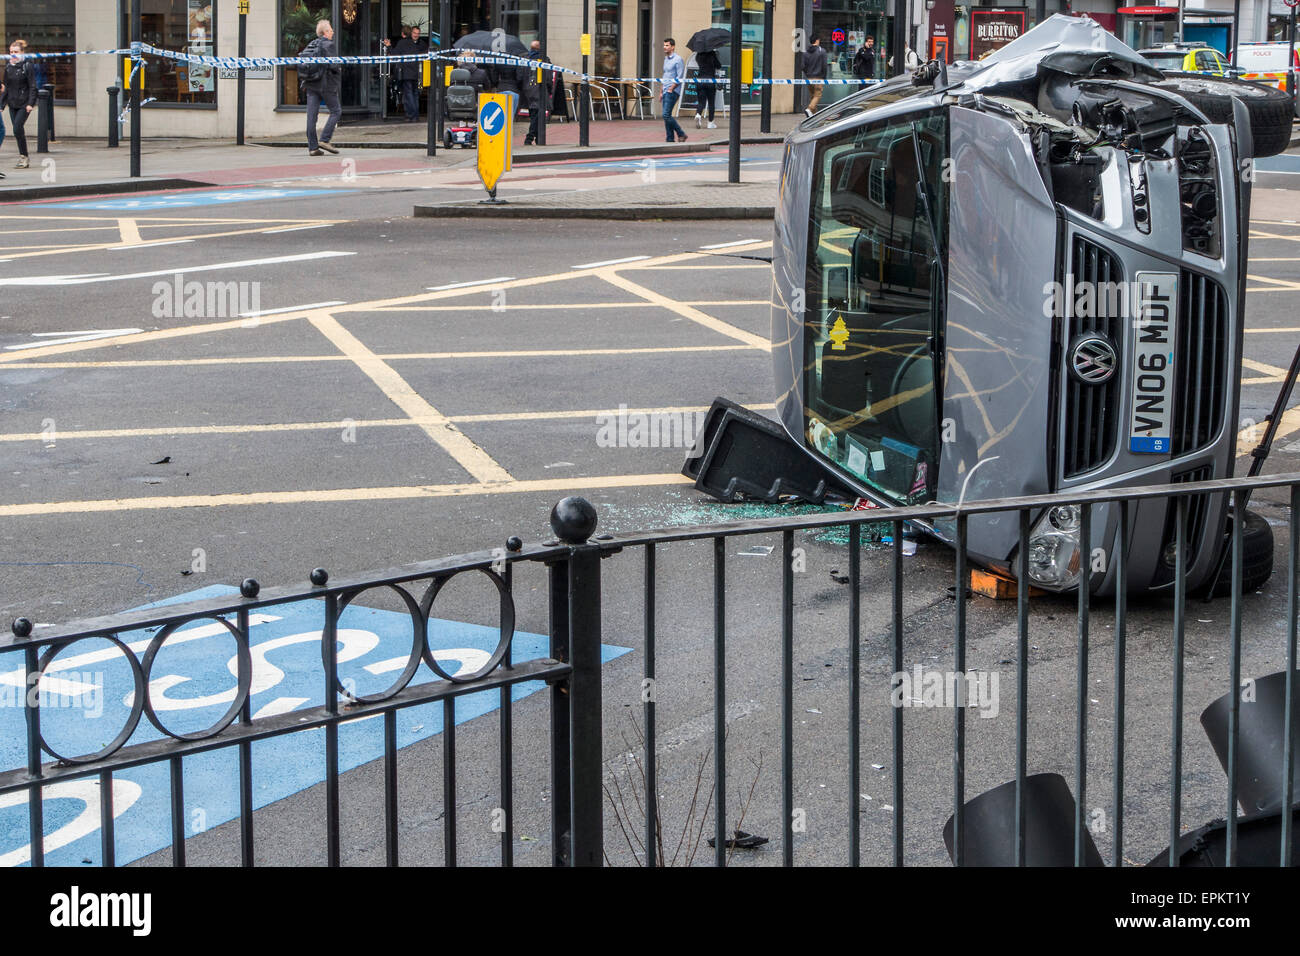 London, UK. 19th May, 2015. A VW car crashes onto its side at the junction of Balham Hill and Clapham South. The air ambulance and fire engines attended the scene and now it is being investigated by Traffic Police and documented by a Police photographer. London UK 19 May 2015. Credit:  Guy Bell/Alamy Live News Stock Photo